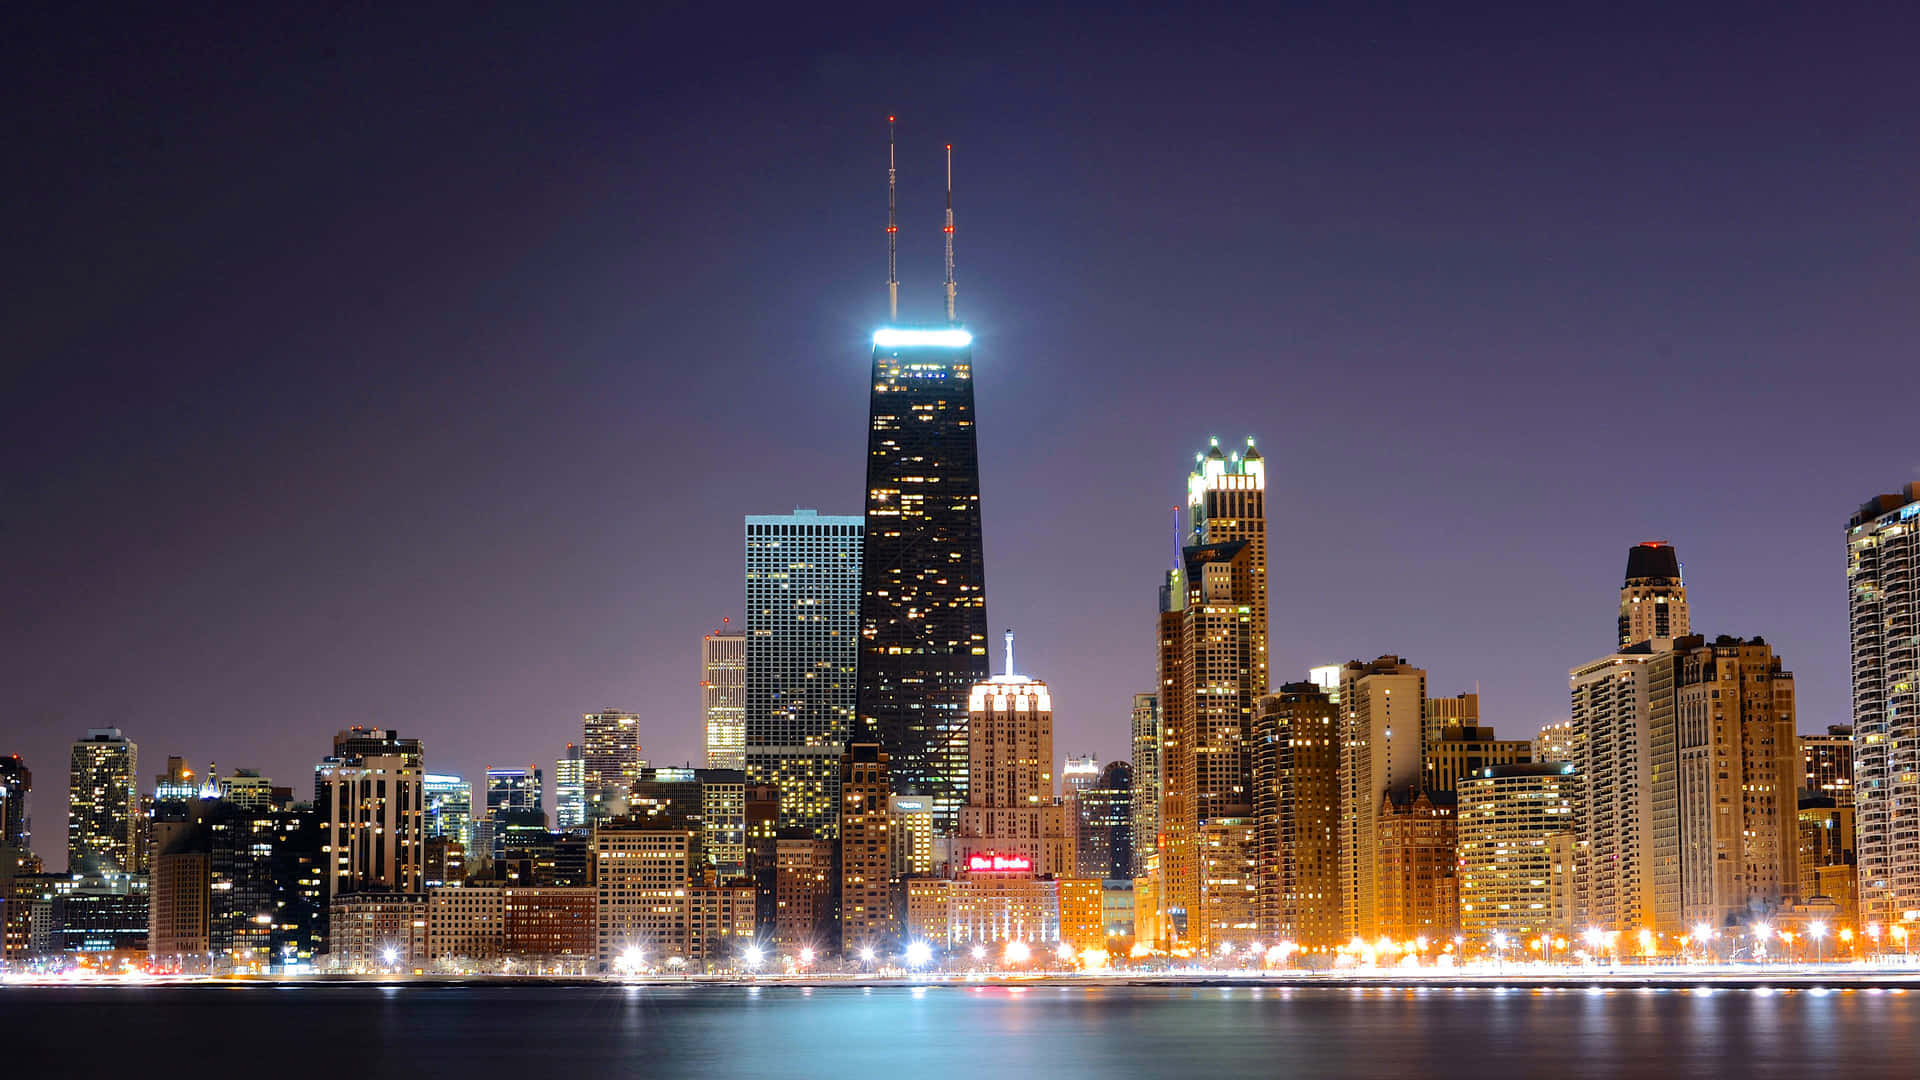 Take in the stunning sight of Downtown Chicago from this 4k Ultra HD Wallpaper Wallpaper